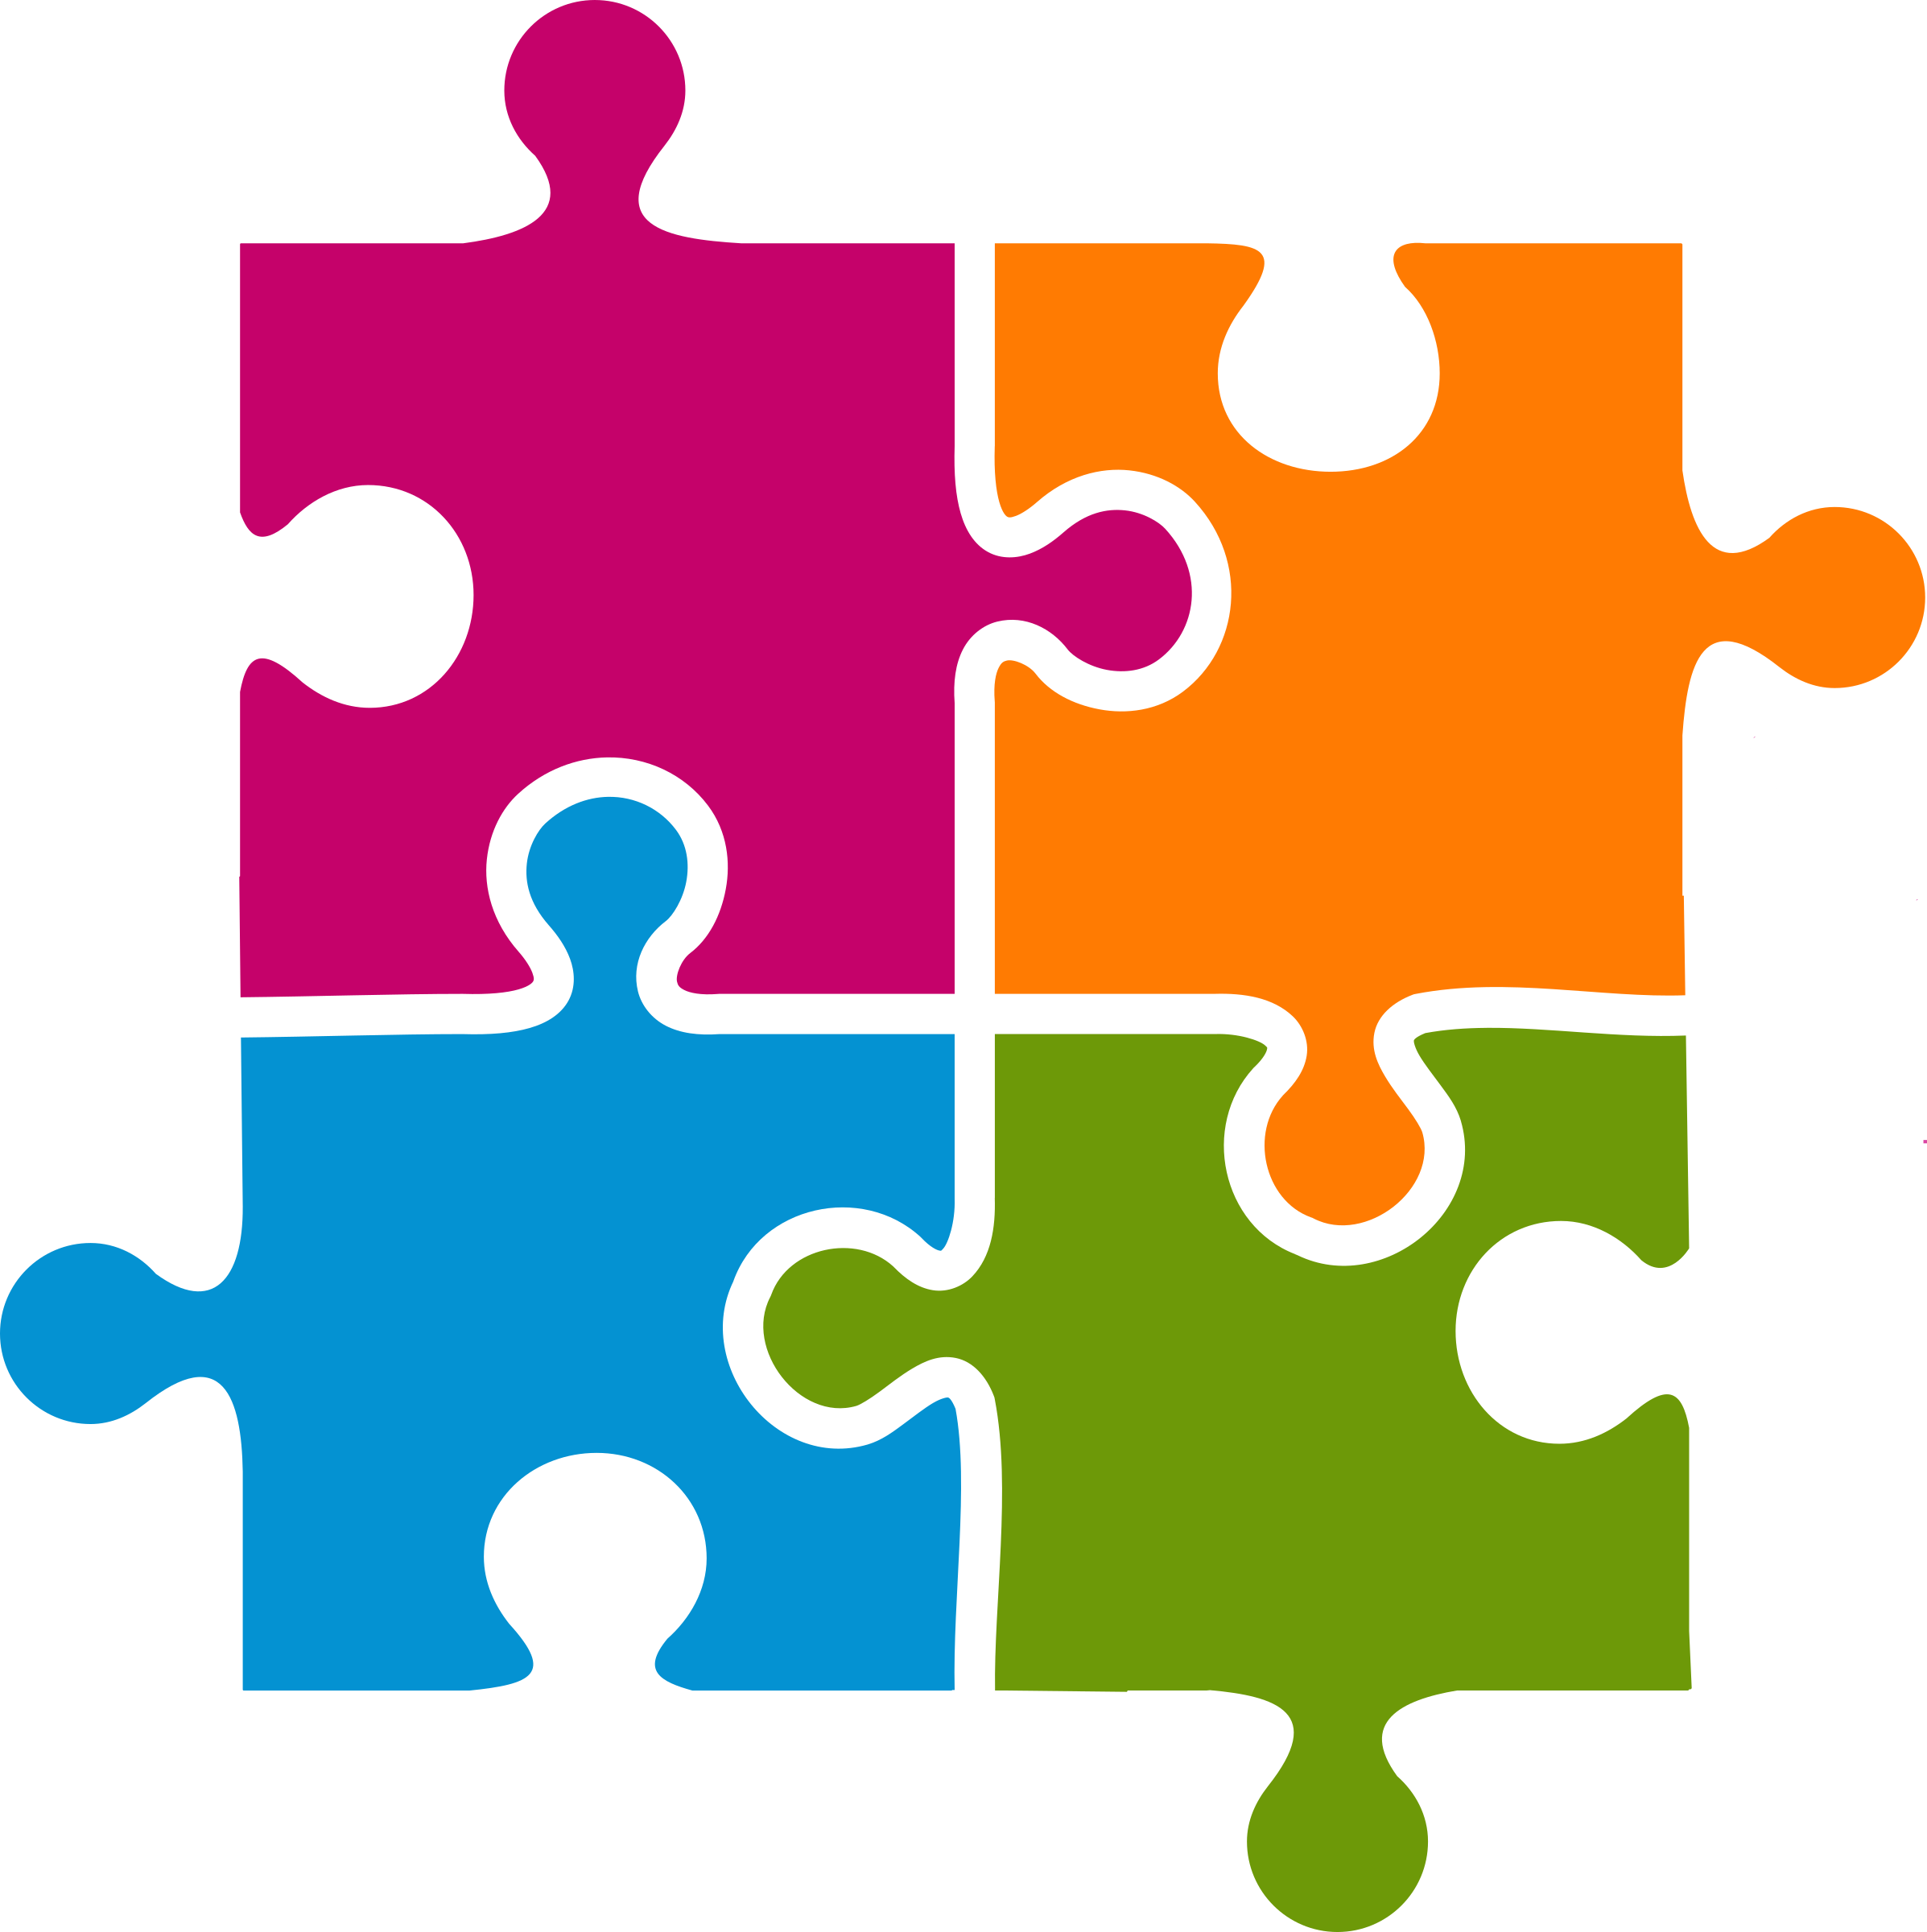 Teamwork clipart jigsaw puzzle. Pin by susana on